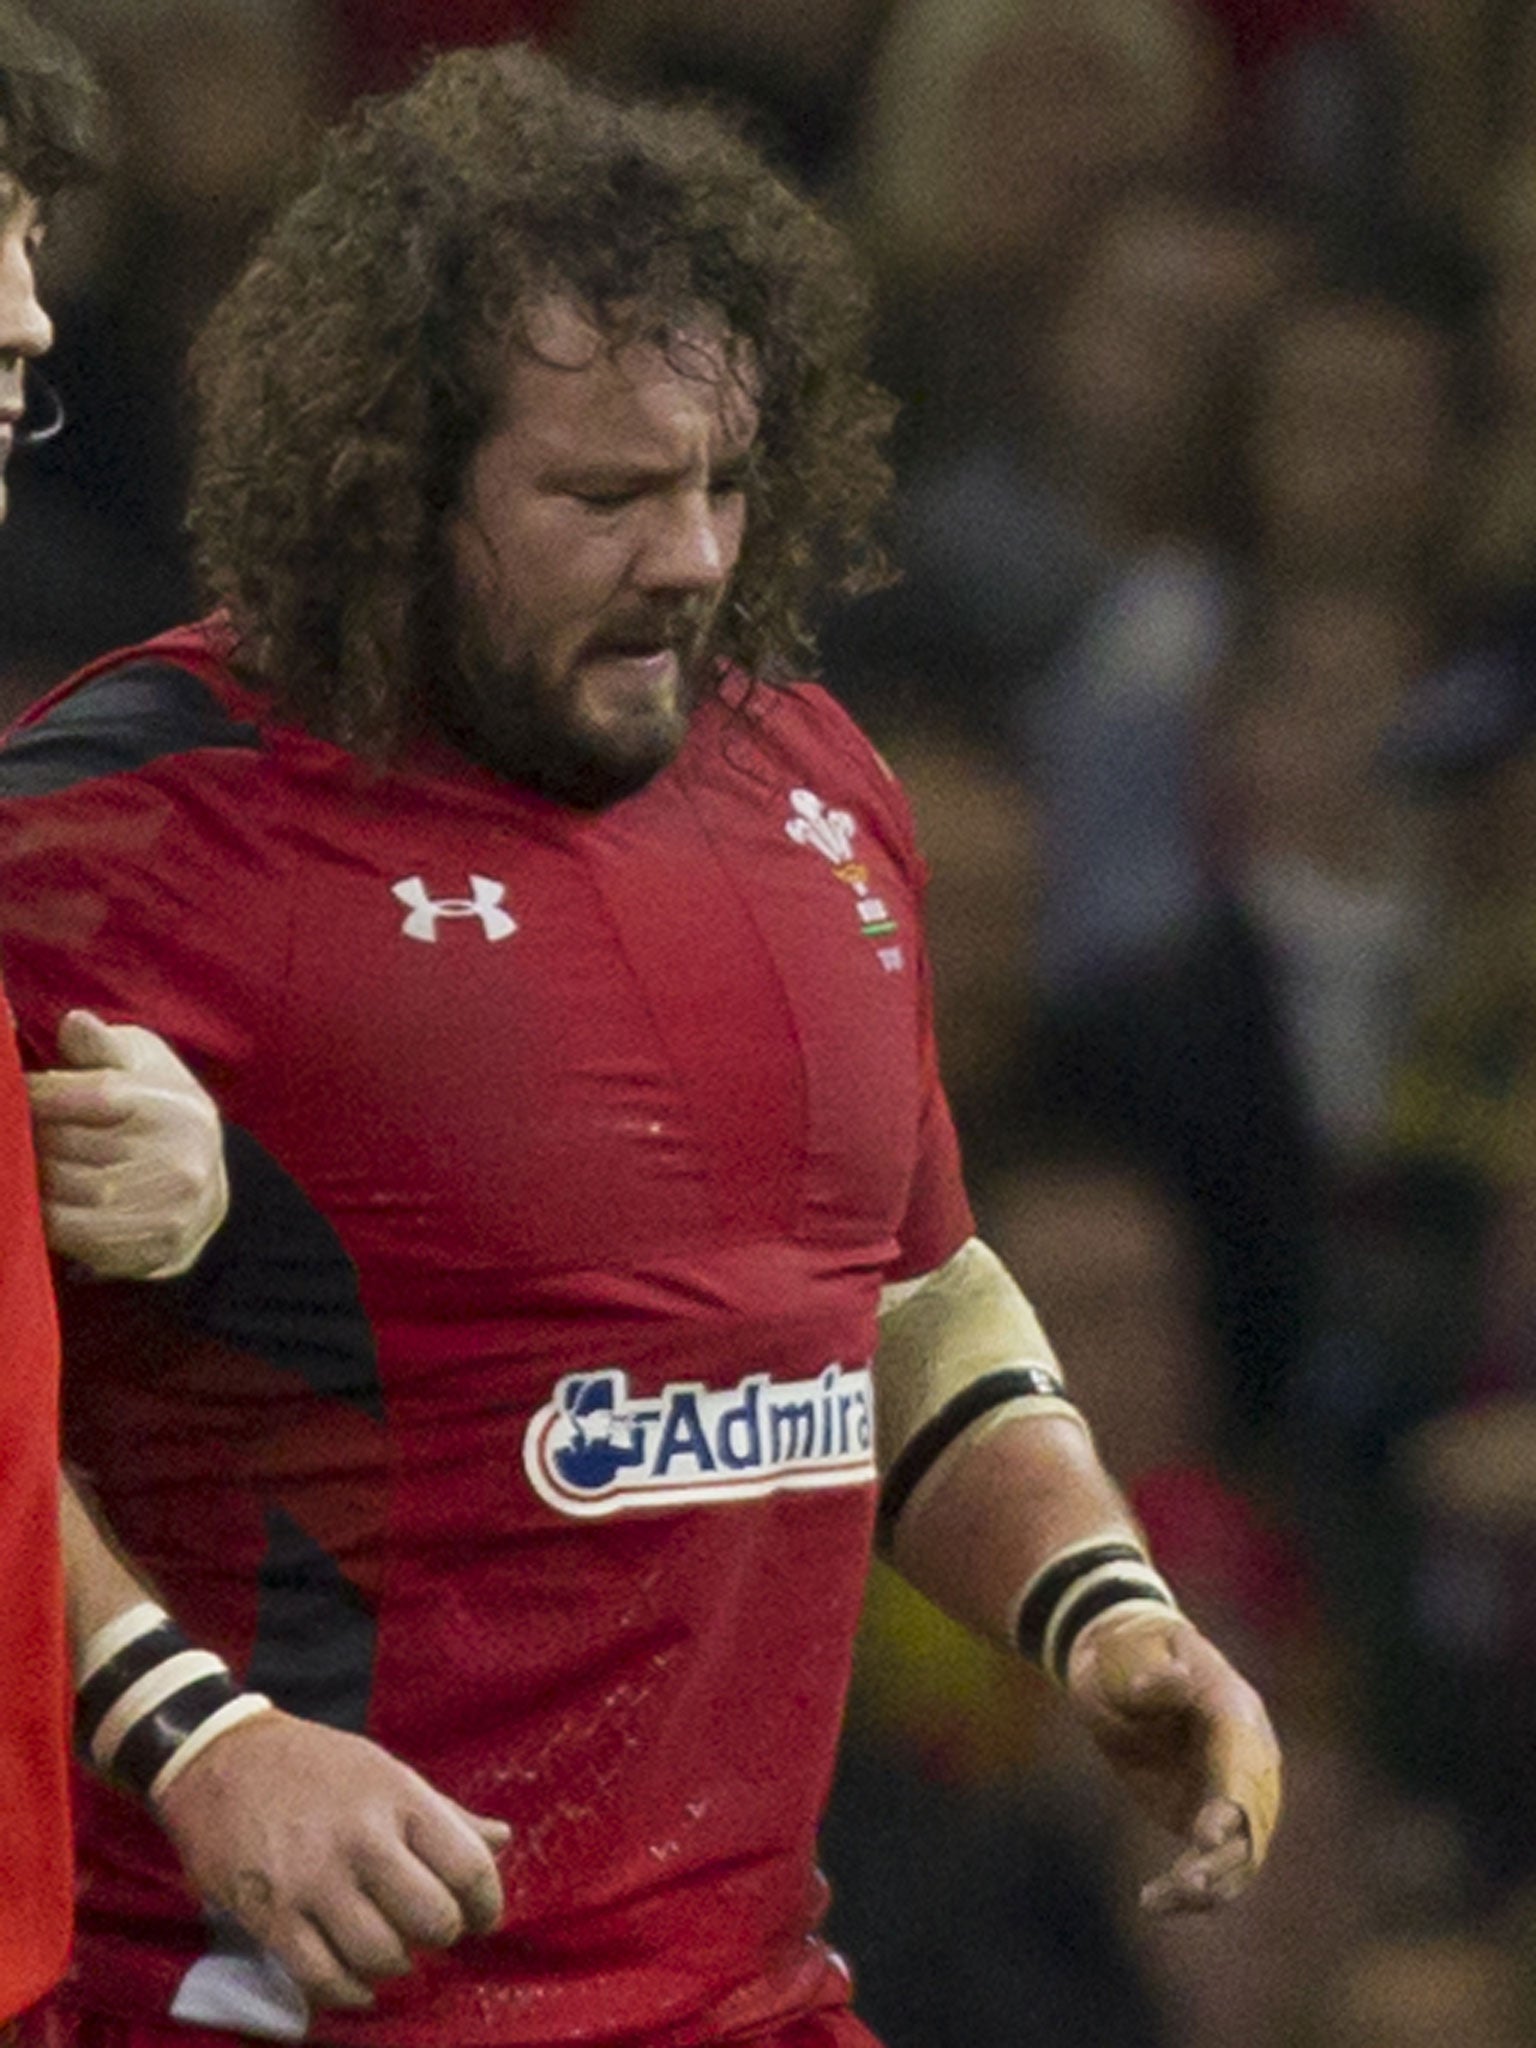 The Wales prop Adam Jones is struggling to be fit for a game against Argentina